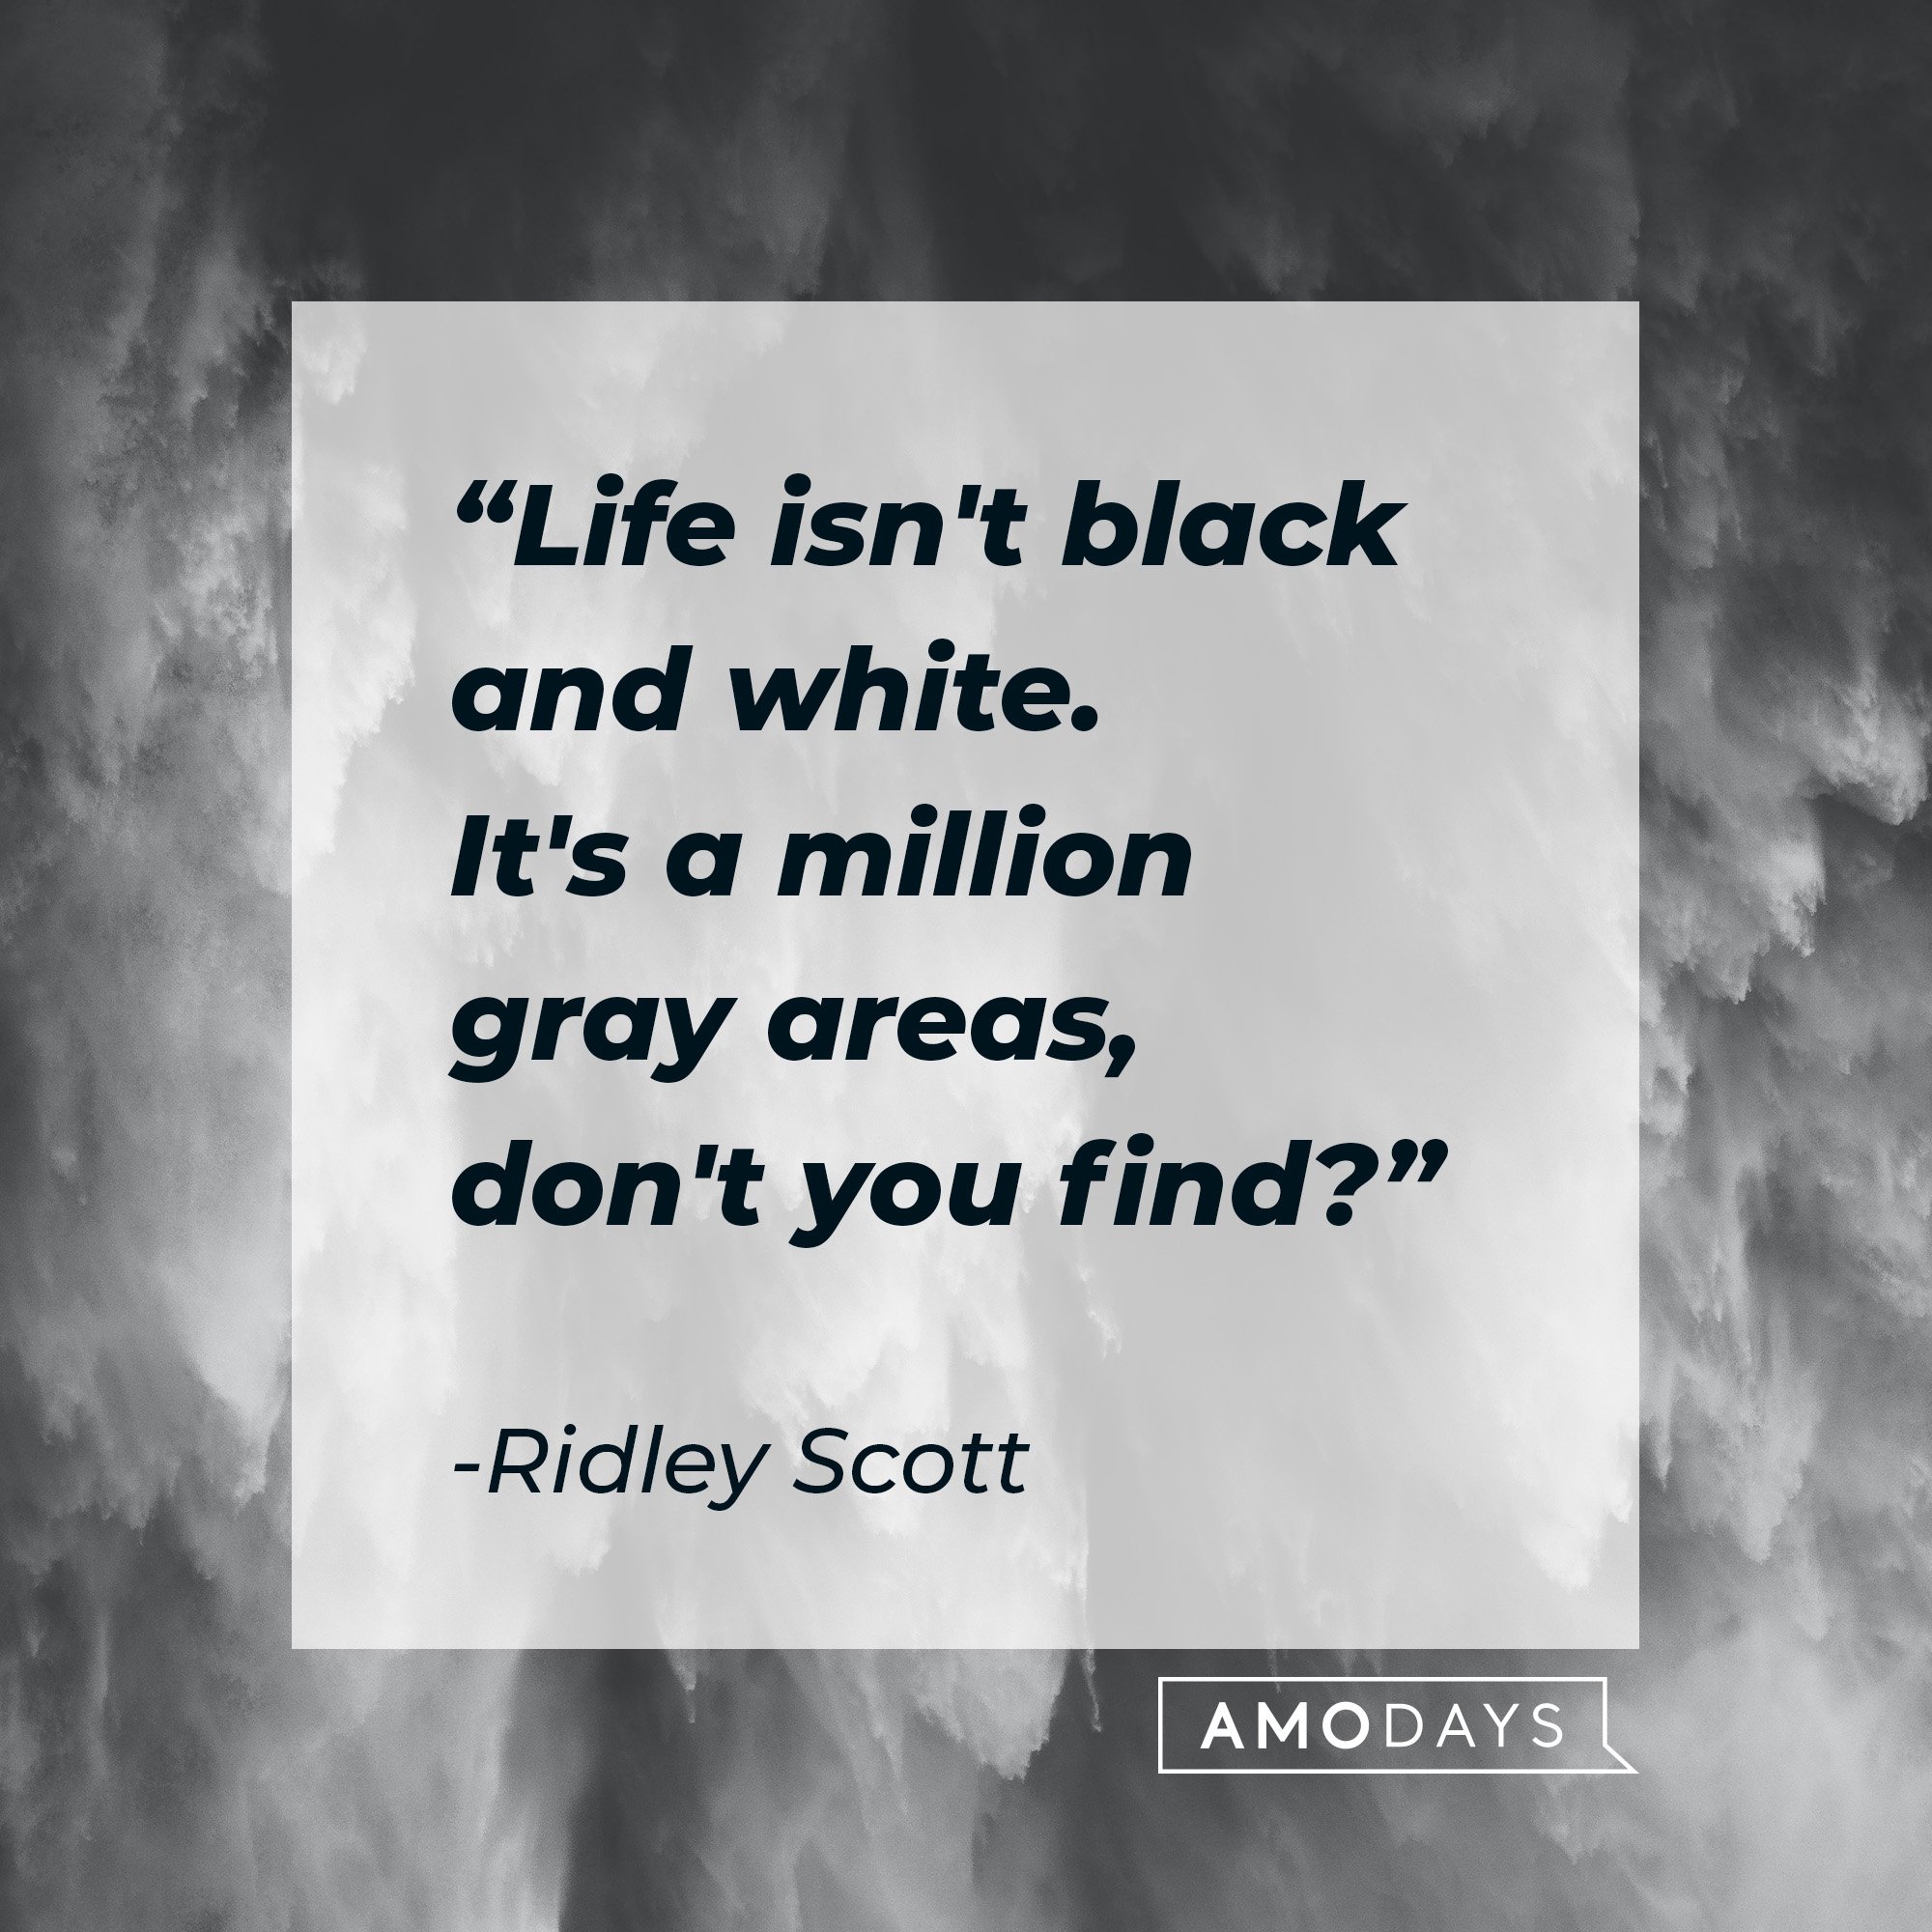 Ridley Scott’s quote: "Life isn't black and white. It's a million gray areas, don't you find?" | Image: AmoDays